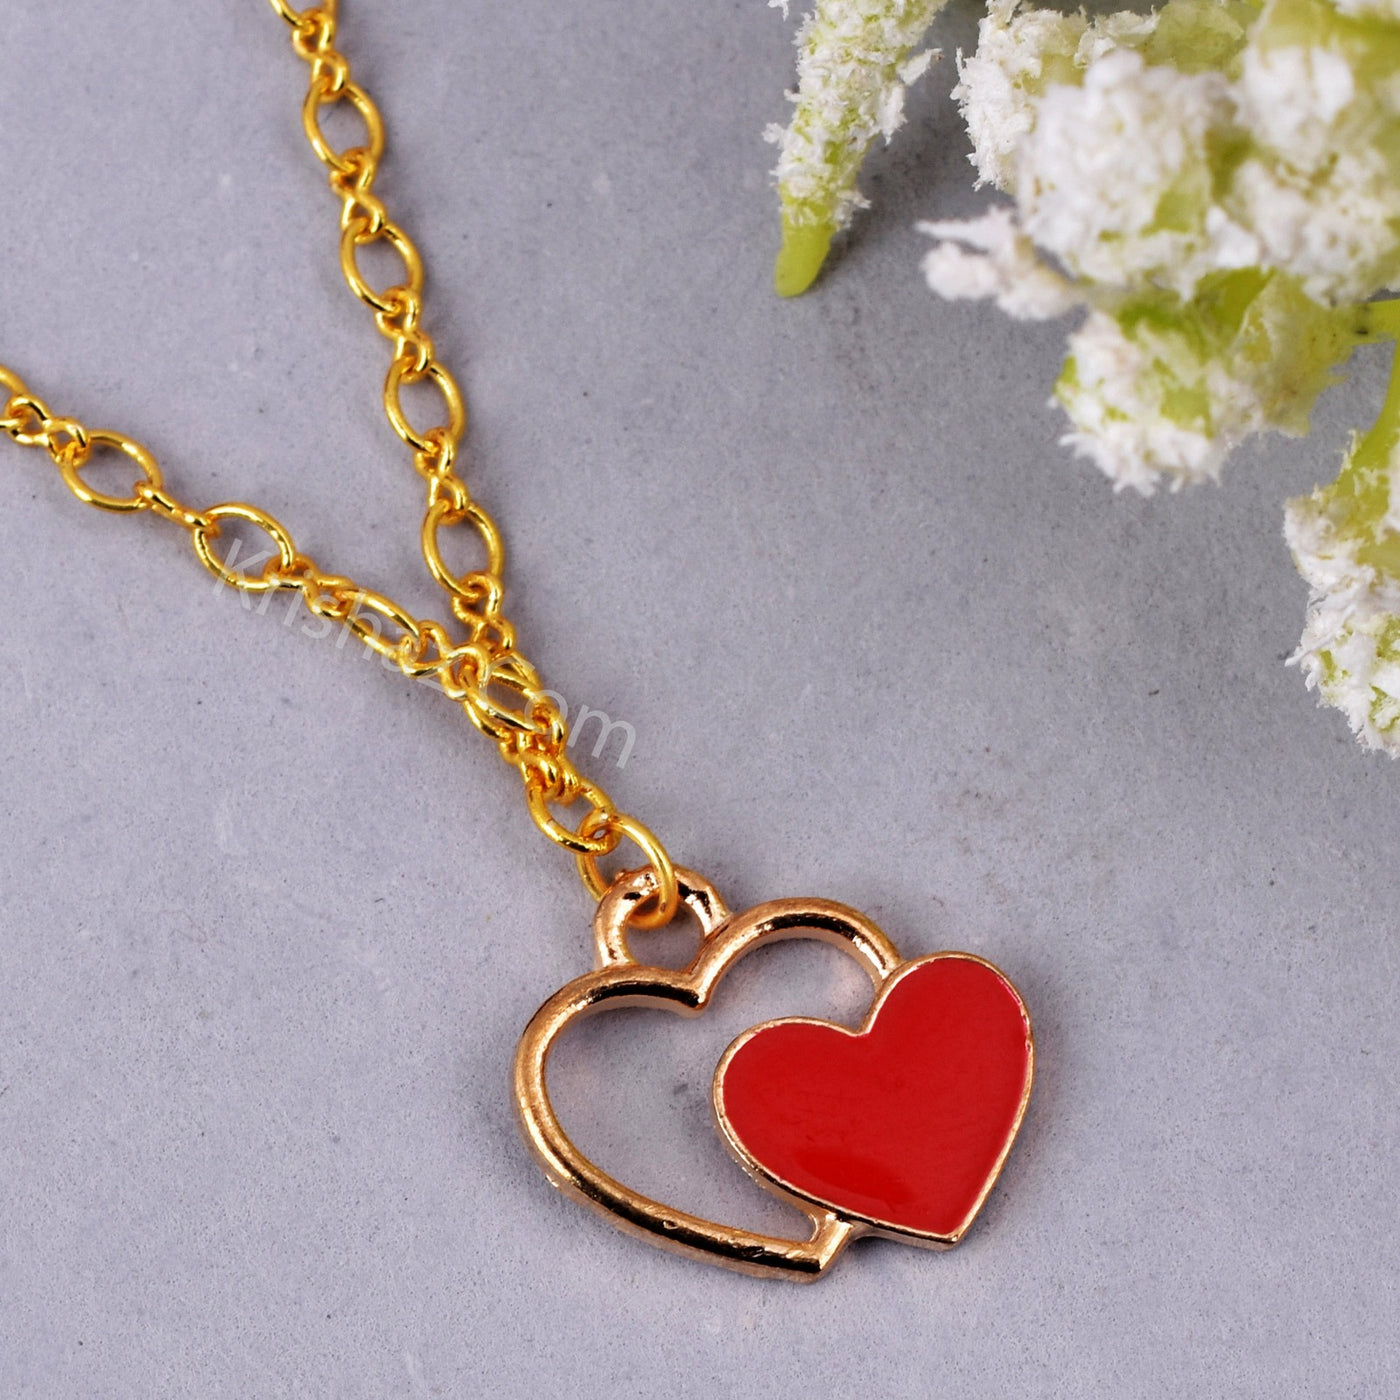 Gold Figure 8 Dainty Chains with Red Heart charms